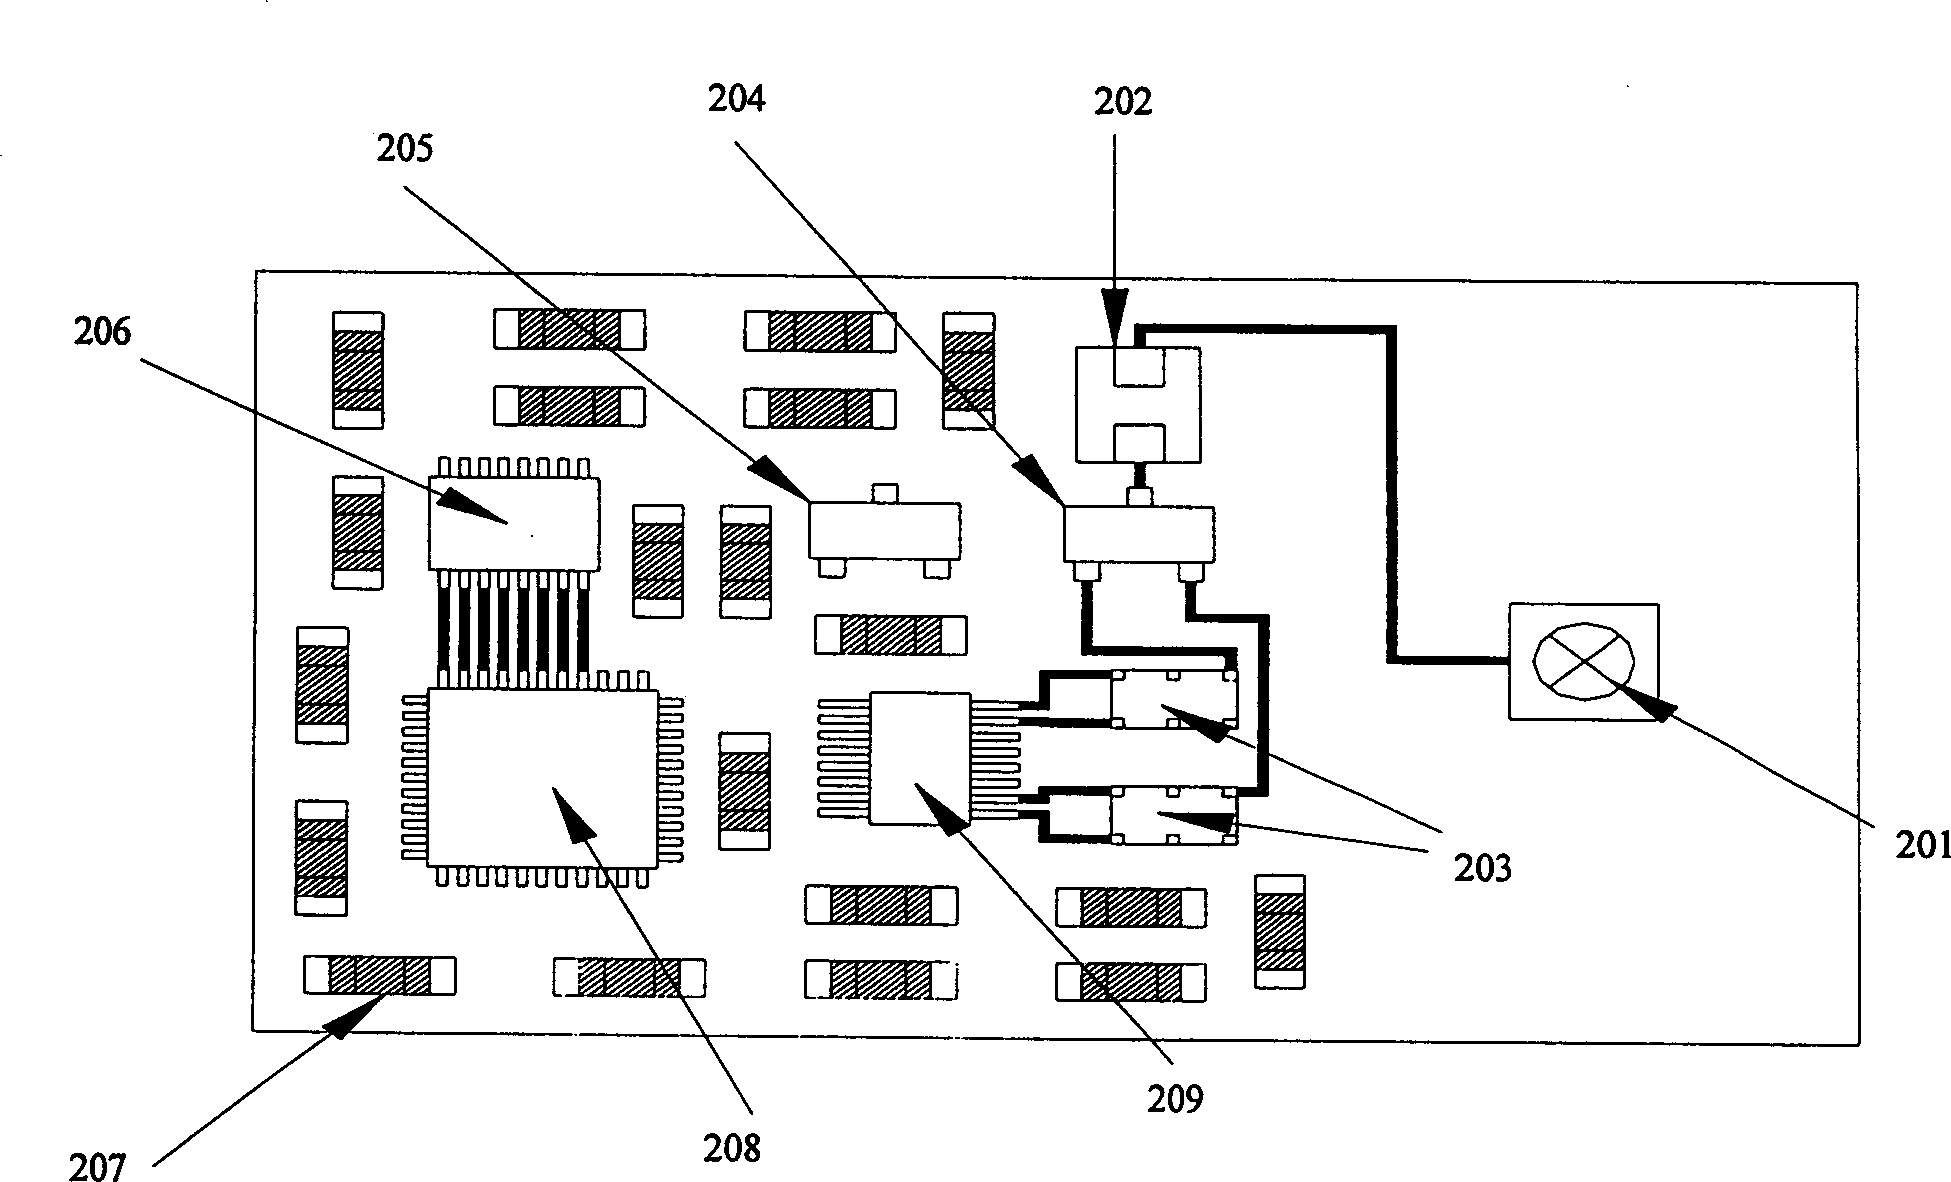 Multi-layer circuit module with multi-layer ceramic substrate and embedded passive element